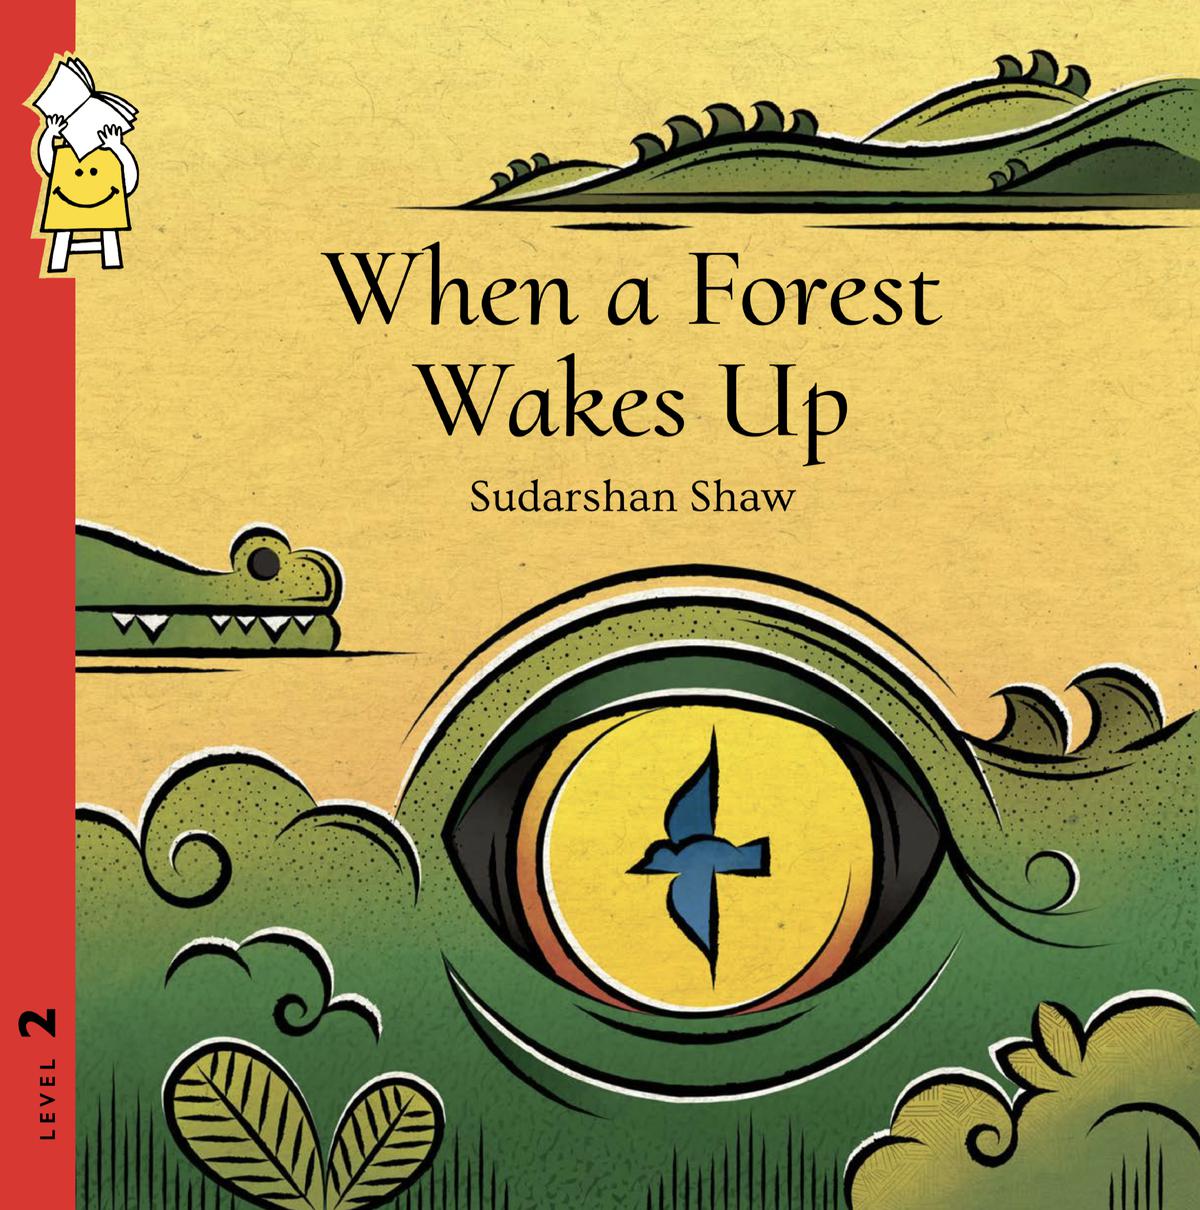 Sudarshan Shaw’s book ‘When a Forest Wakes Up’ 